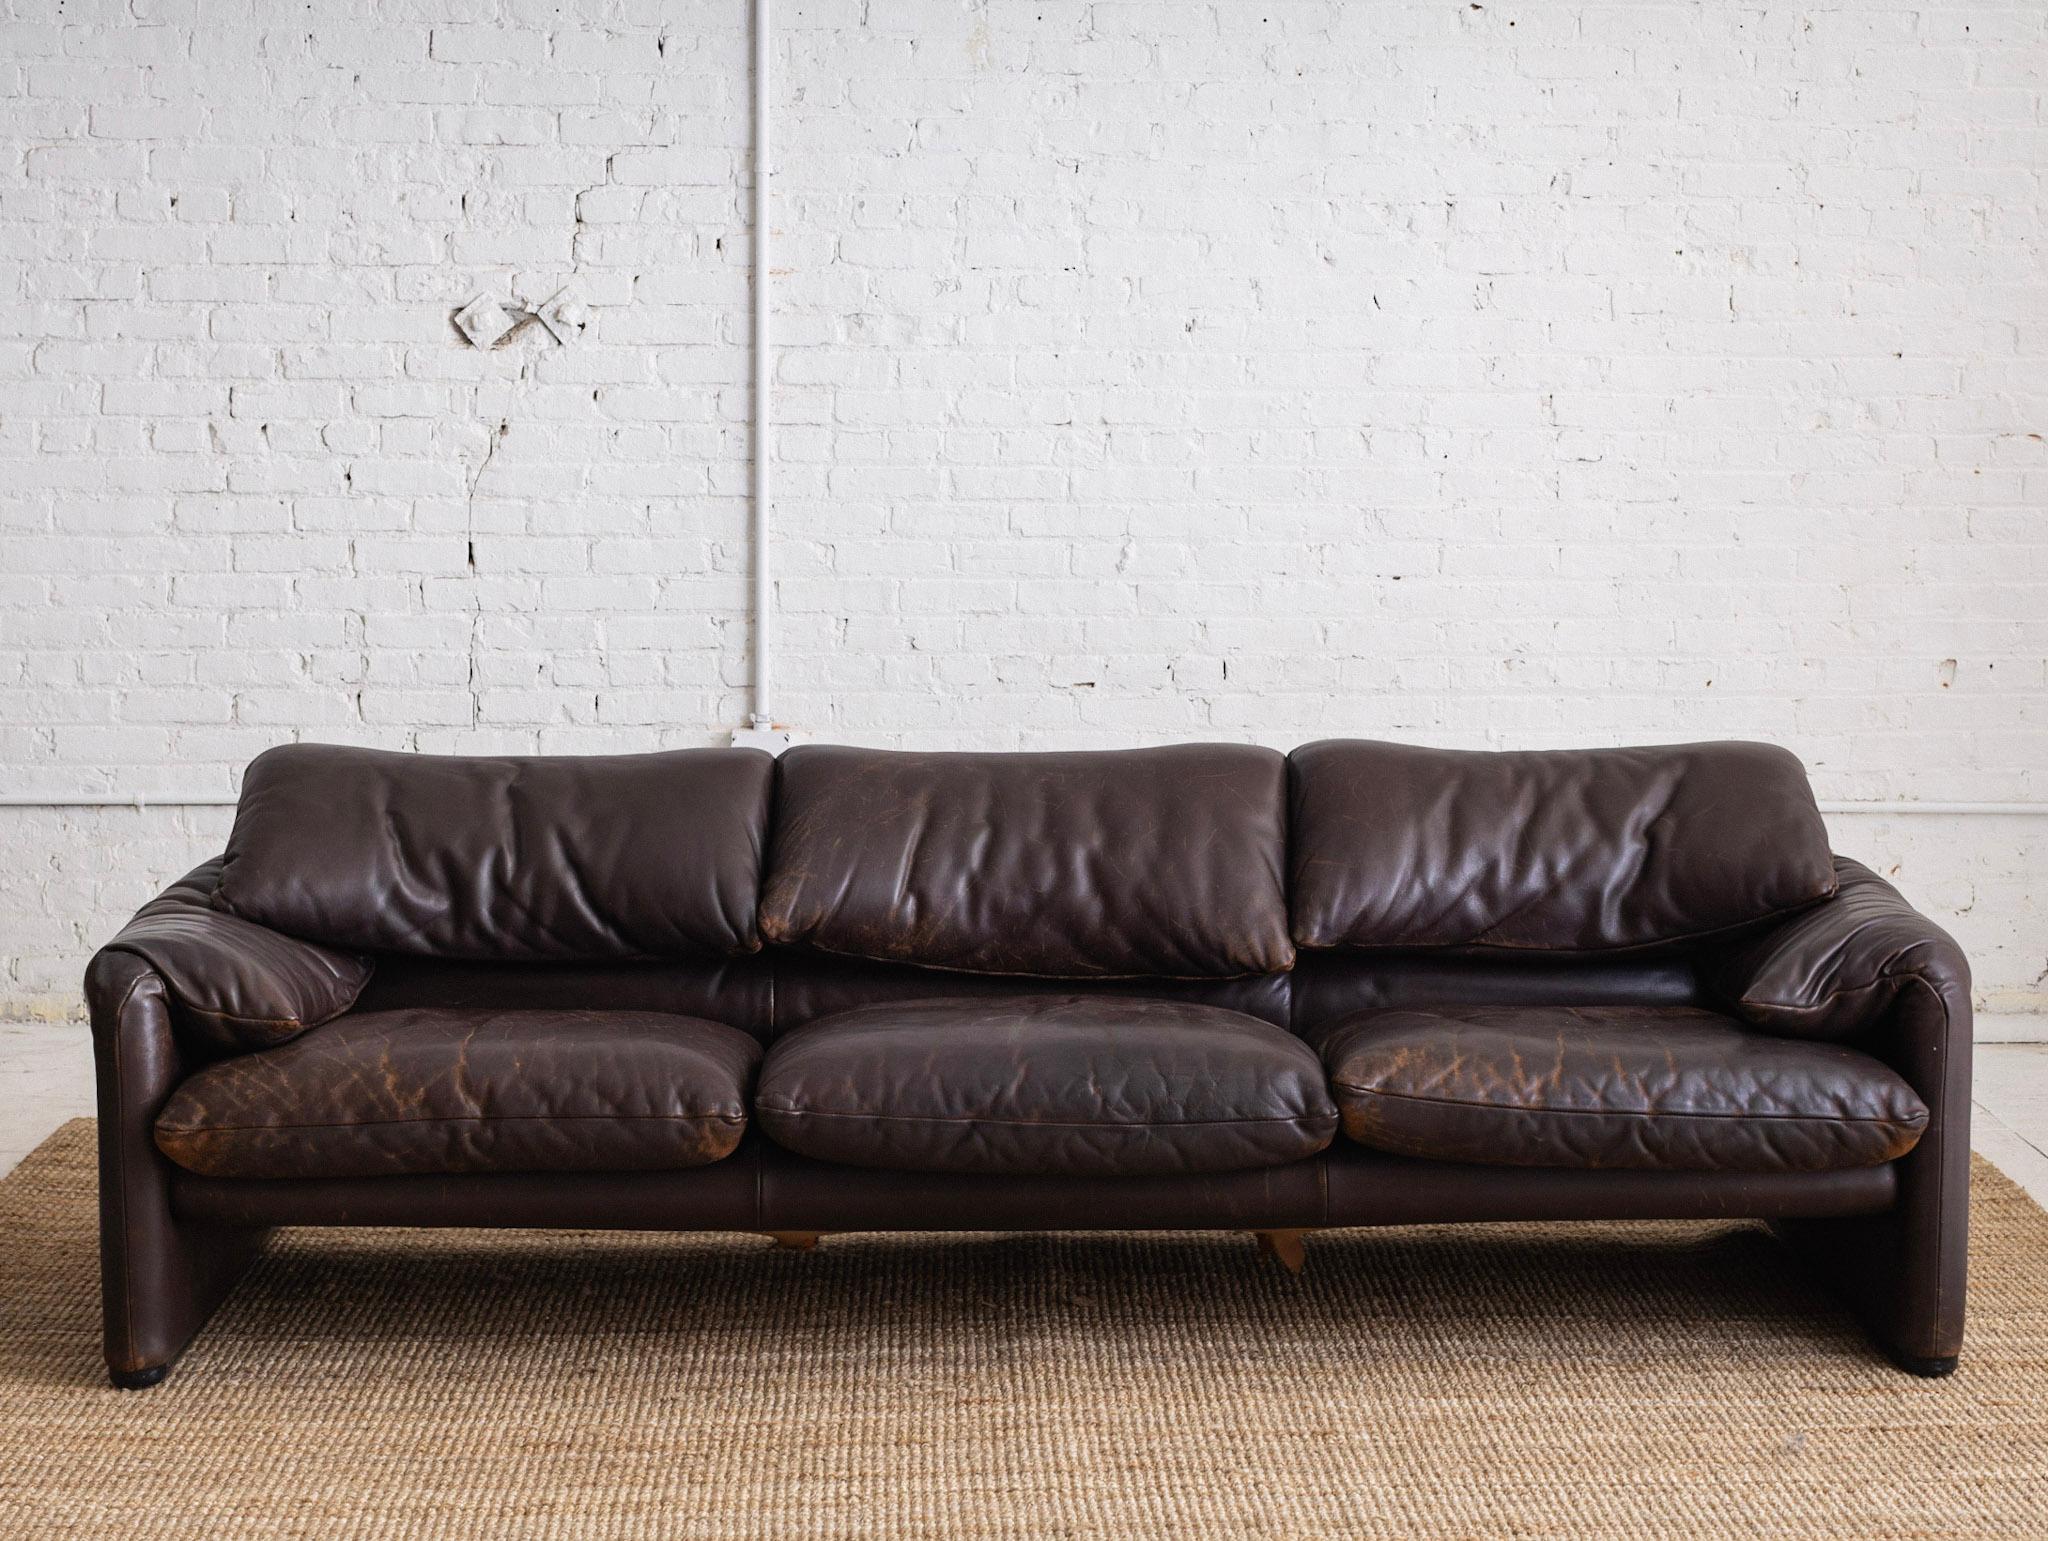 Maralunga 3 Seat Sofa by Vico Magistretti for Cassina in Chocolate Brown Leather 3